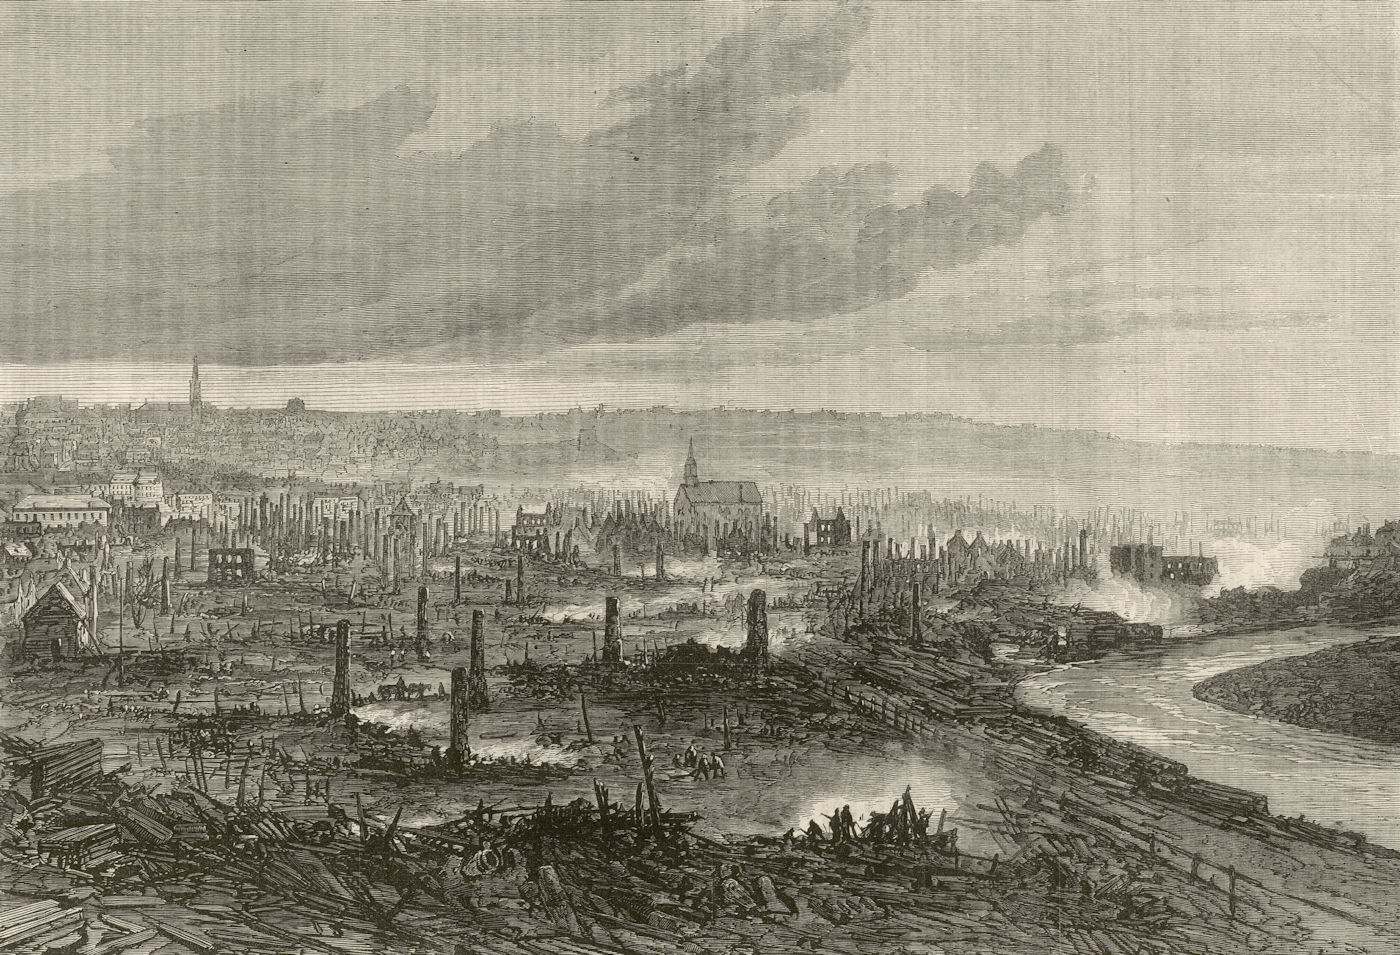 The great fire at Quebec: view from the Marine Hospital. Canada 1866 ILN print